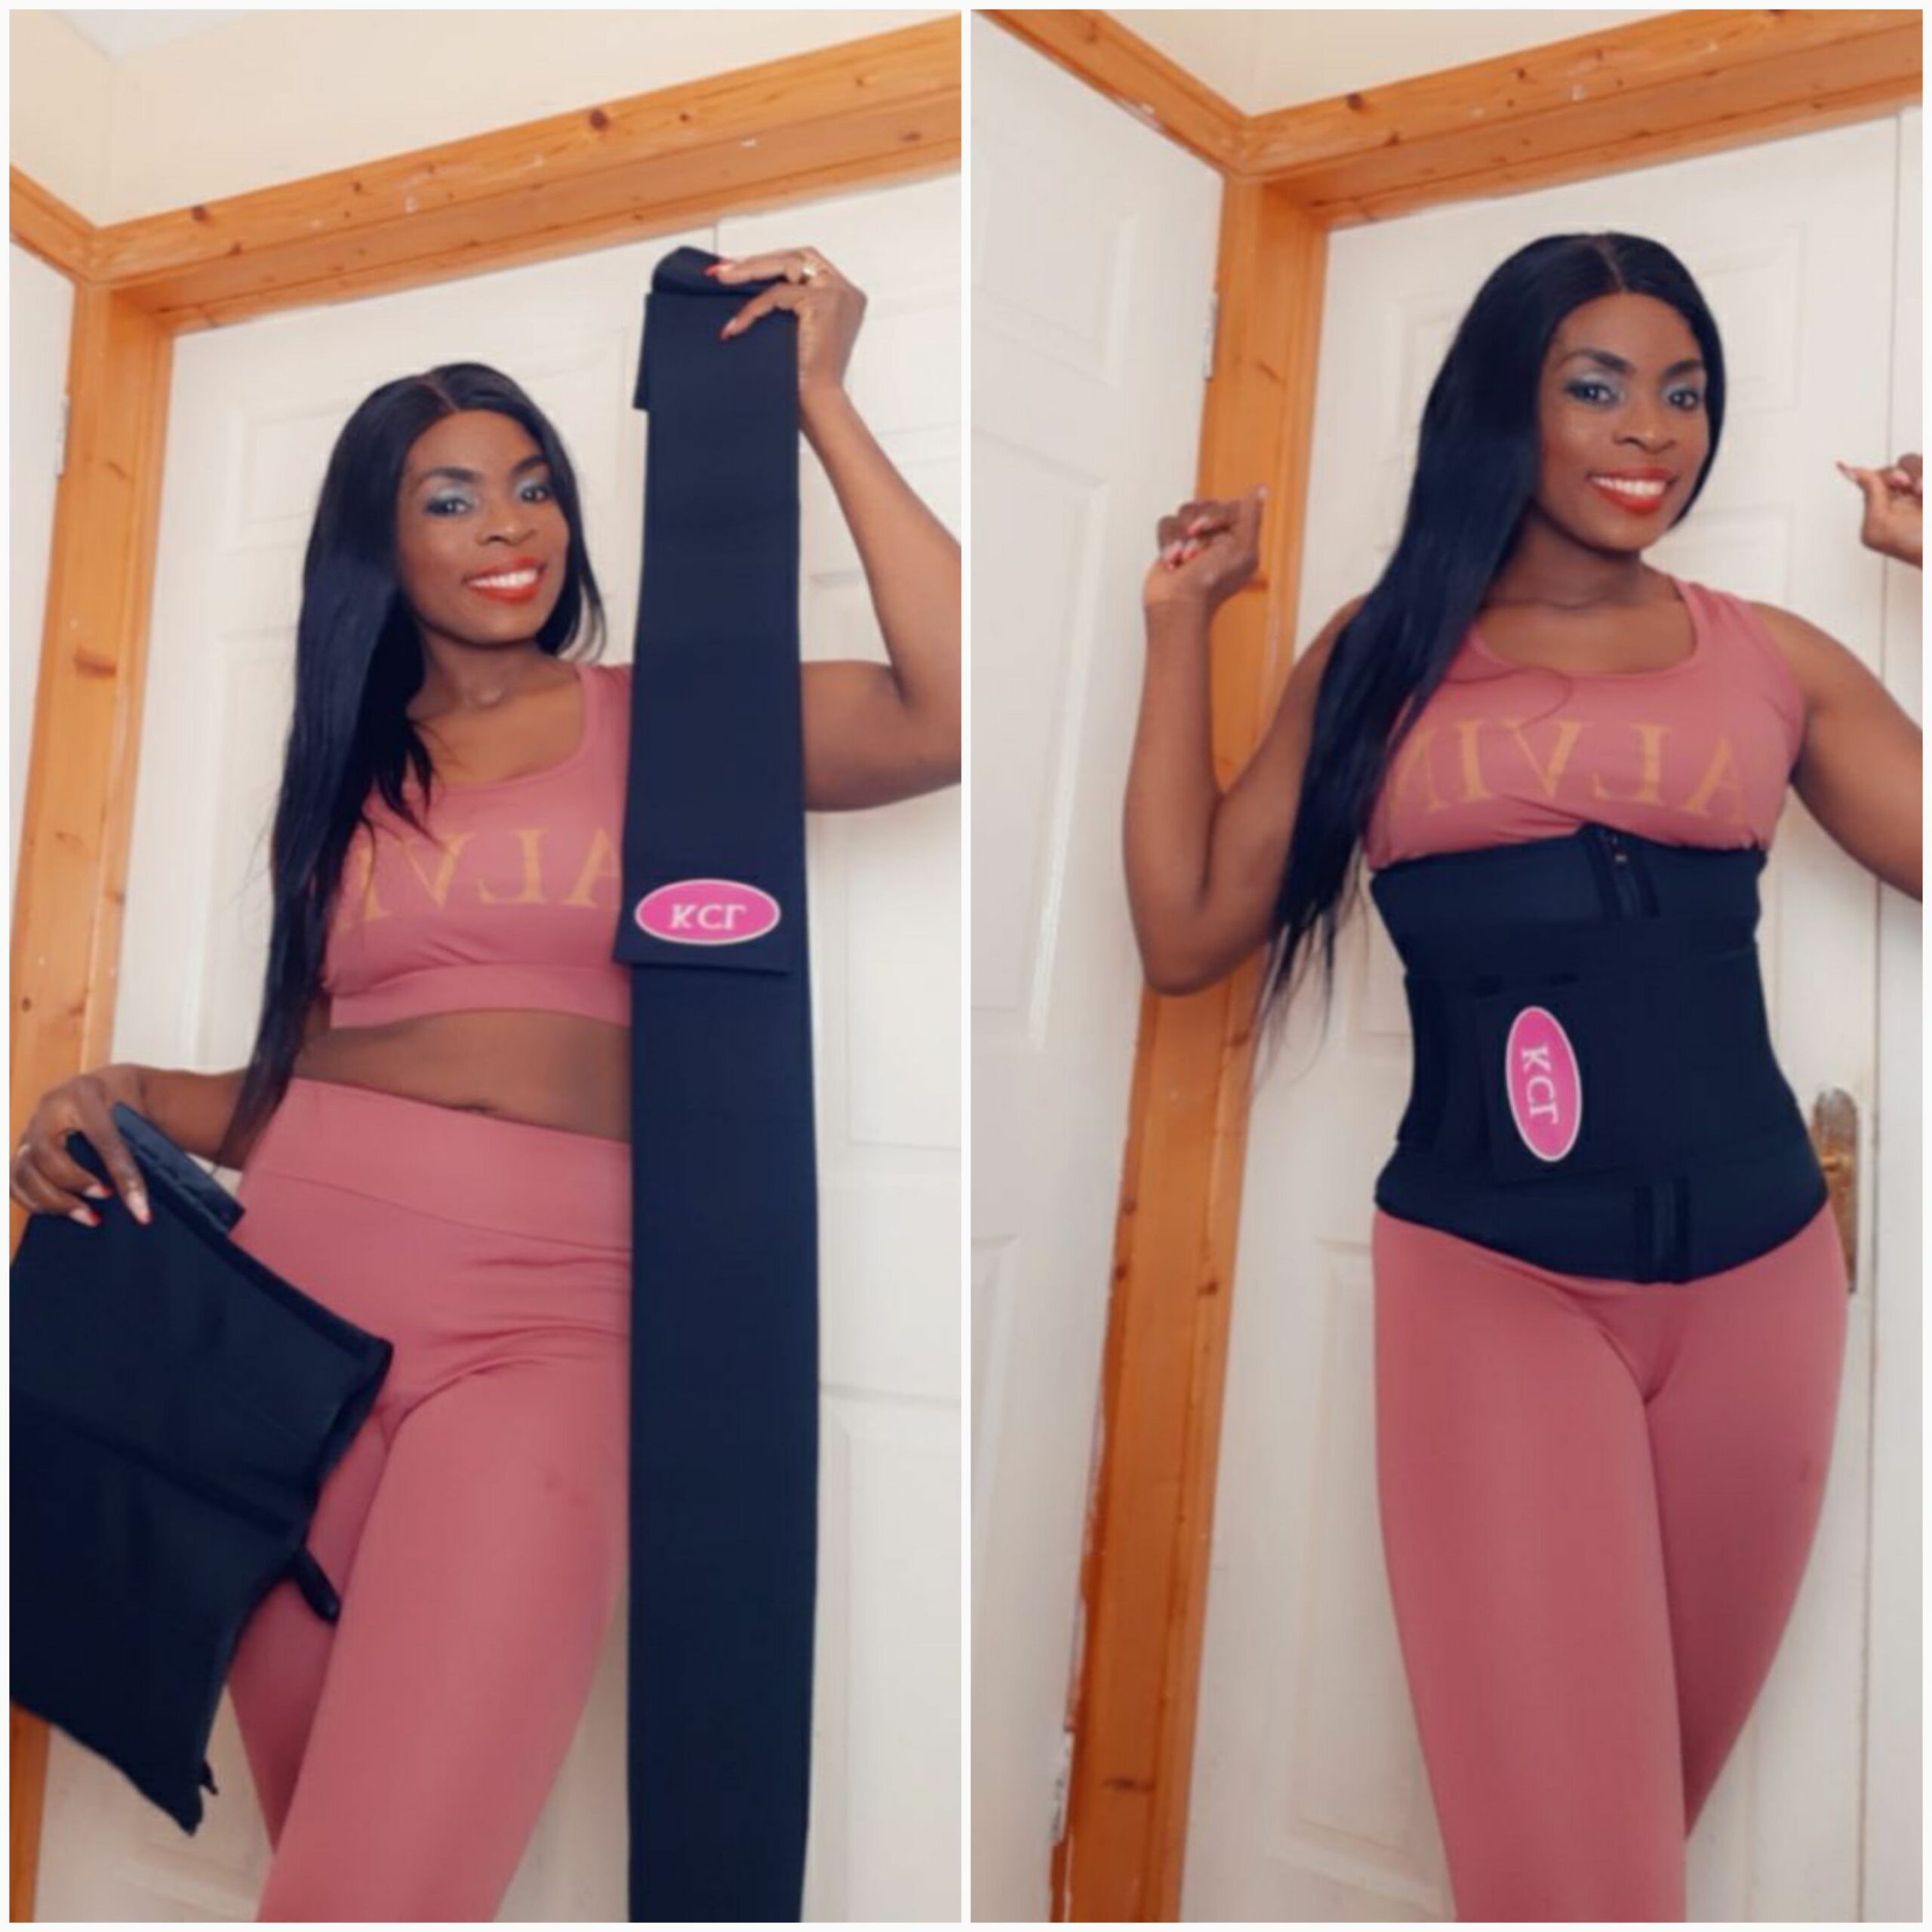 4 in 1 Waist Trainer with Wrap belt – Kalicious Collections